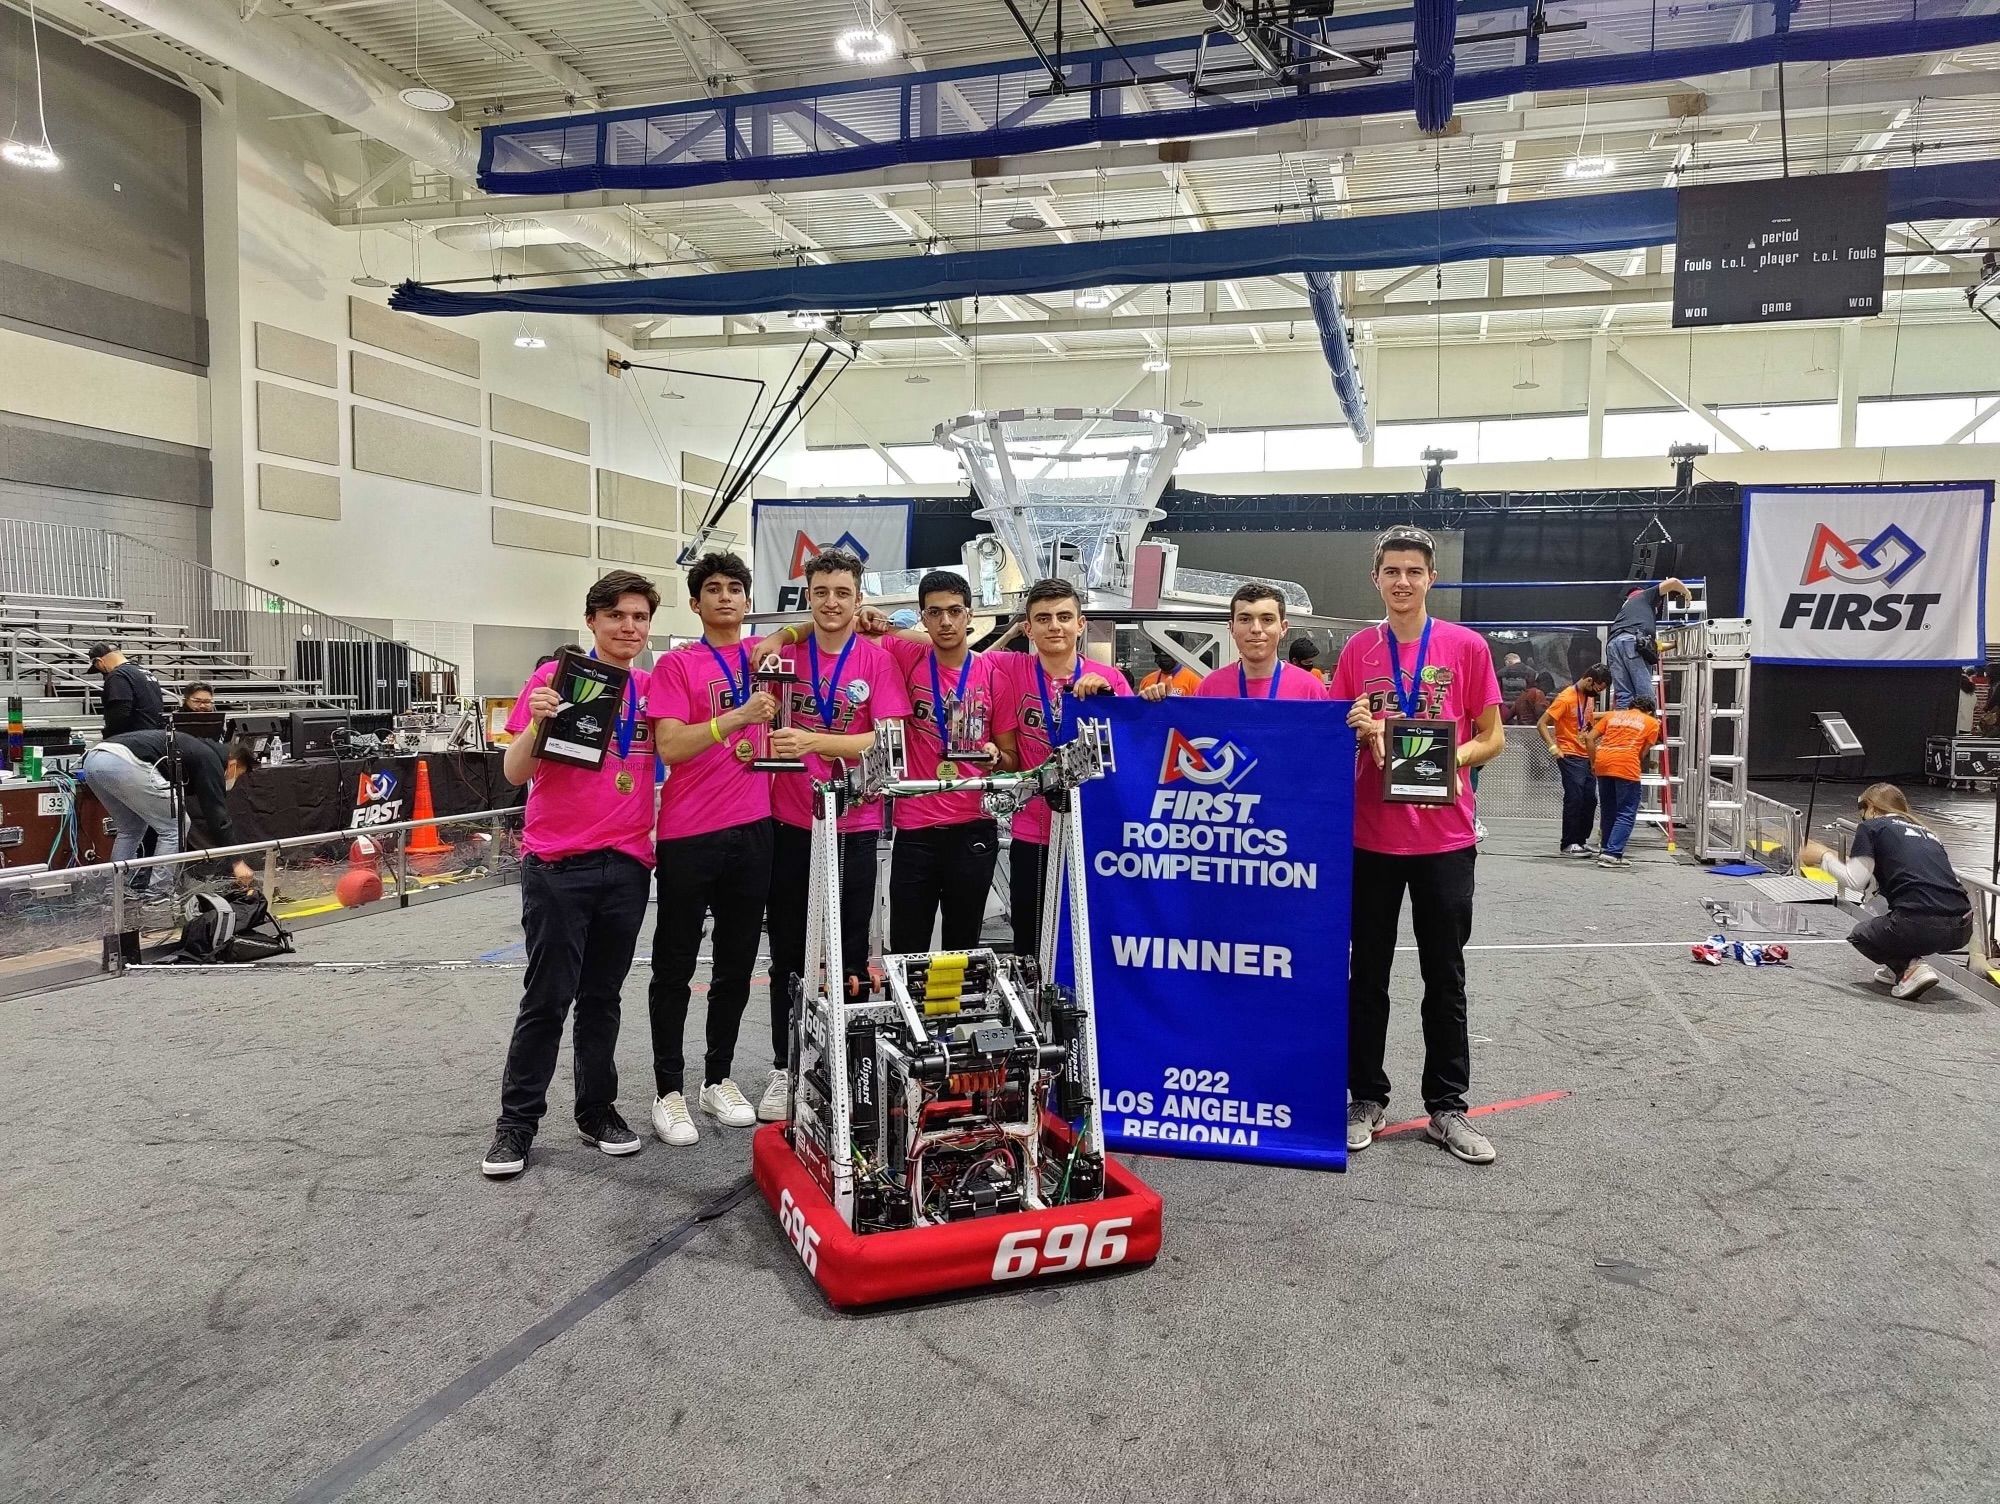 Drive team at LA Regional: those who worked directly with the robot during competition matches.